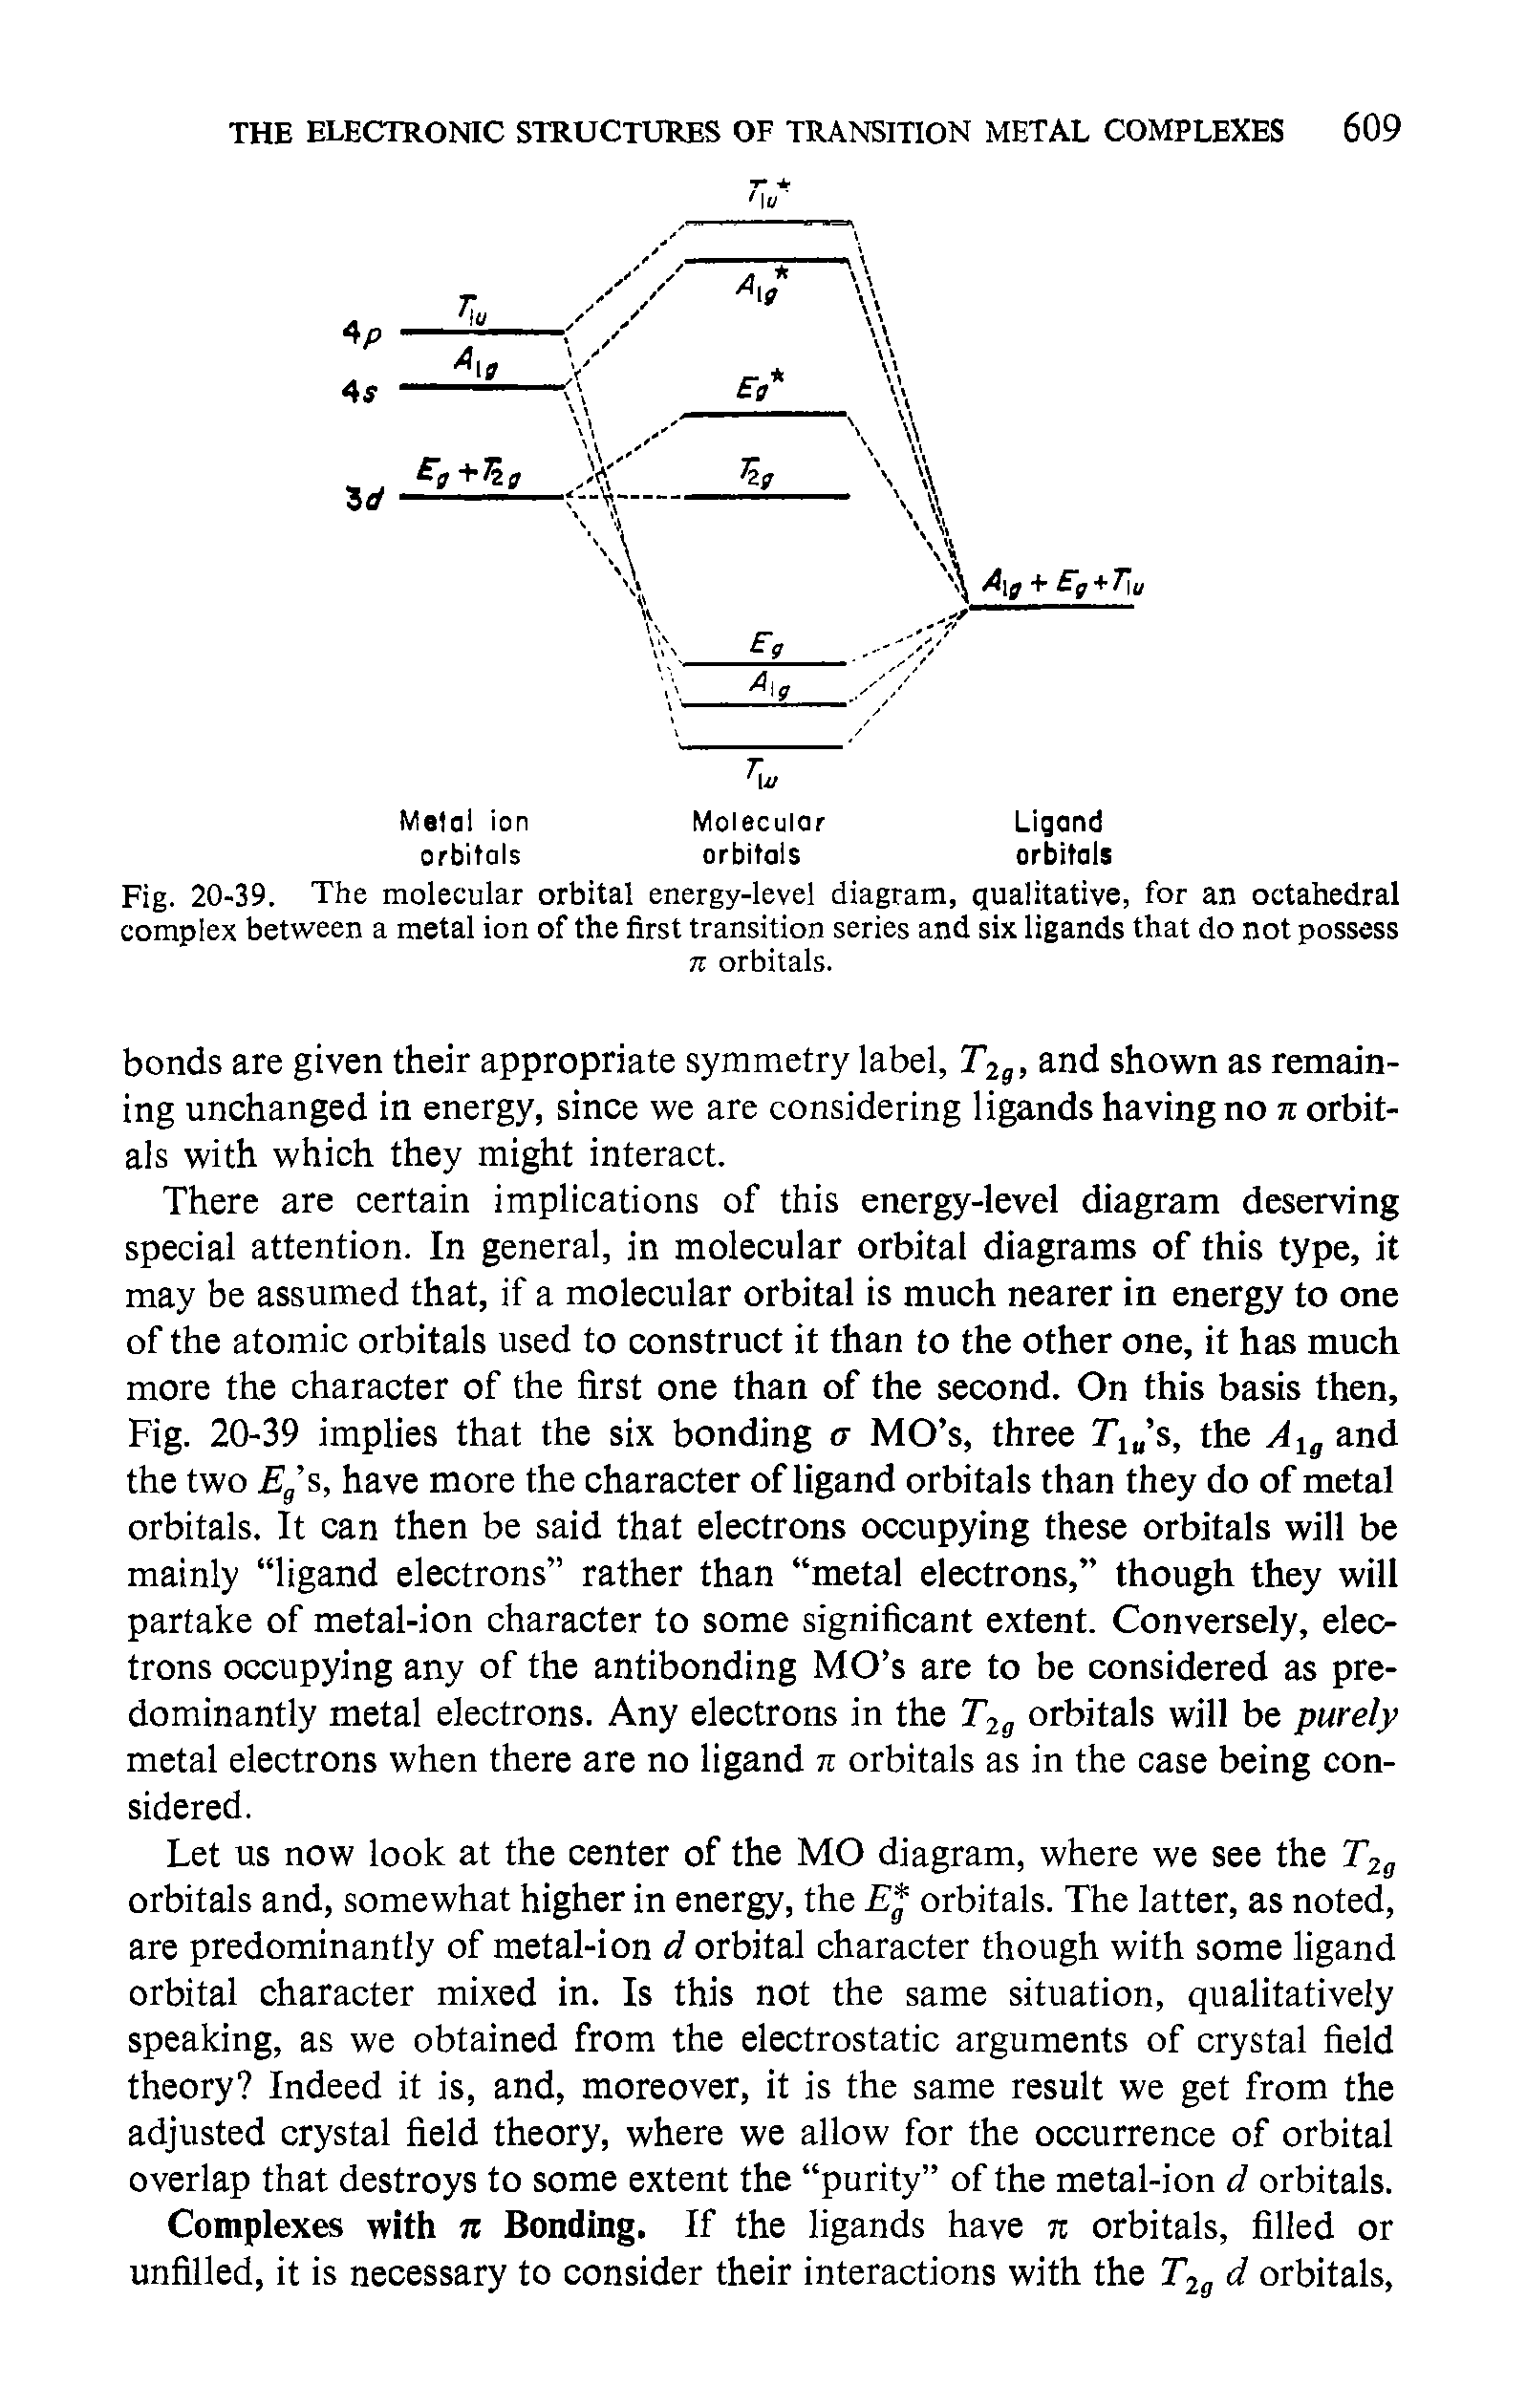 Fig. 20-39. The molecular orbital energy-level diagram, qualitative, for an octahedral complex between a metal ion of the first transition series and six ligands that do not possess...